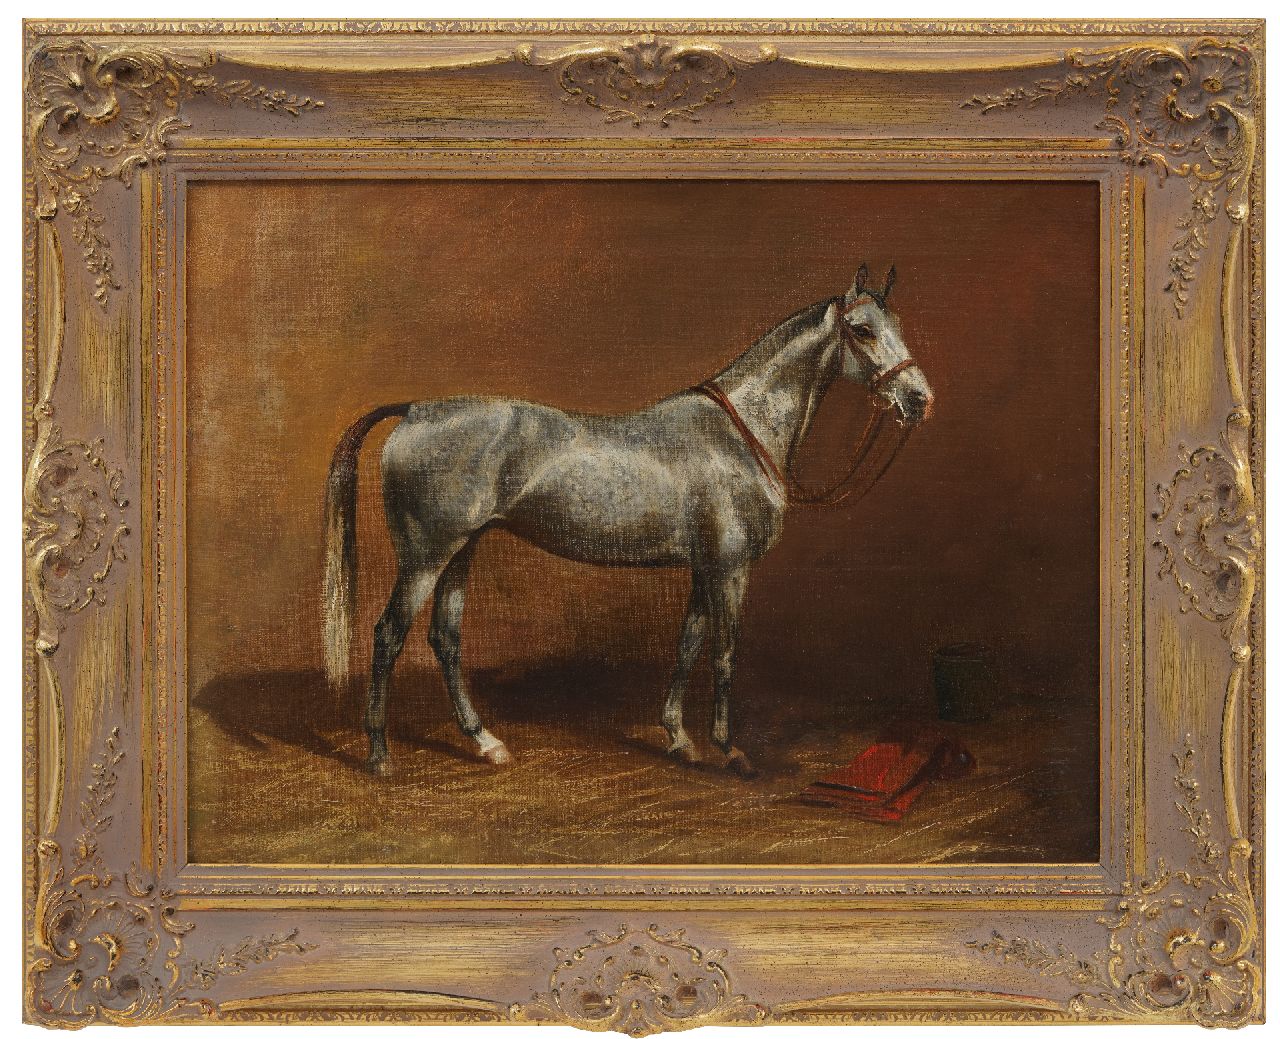 Westerop W.  | Wilhelm Westerop | Paintings offered for sale | Portrait of a gray horse, oil on canvas 35.0 x 45.0 cm, signed l.l. and dated 1929